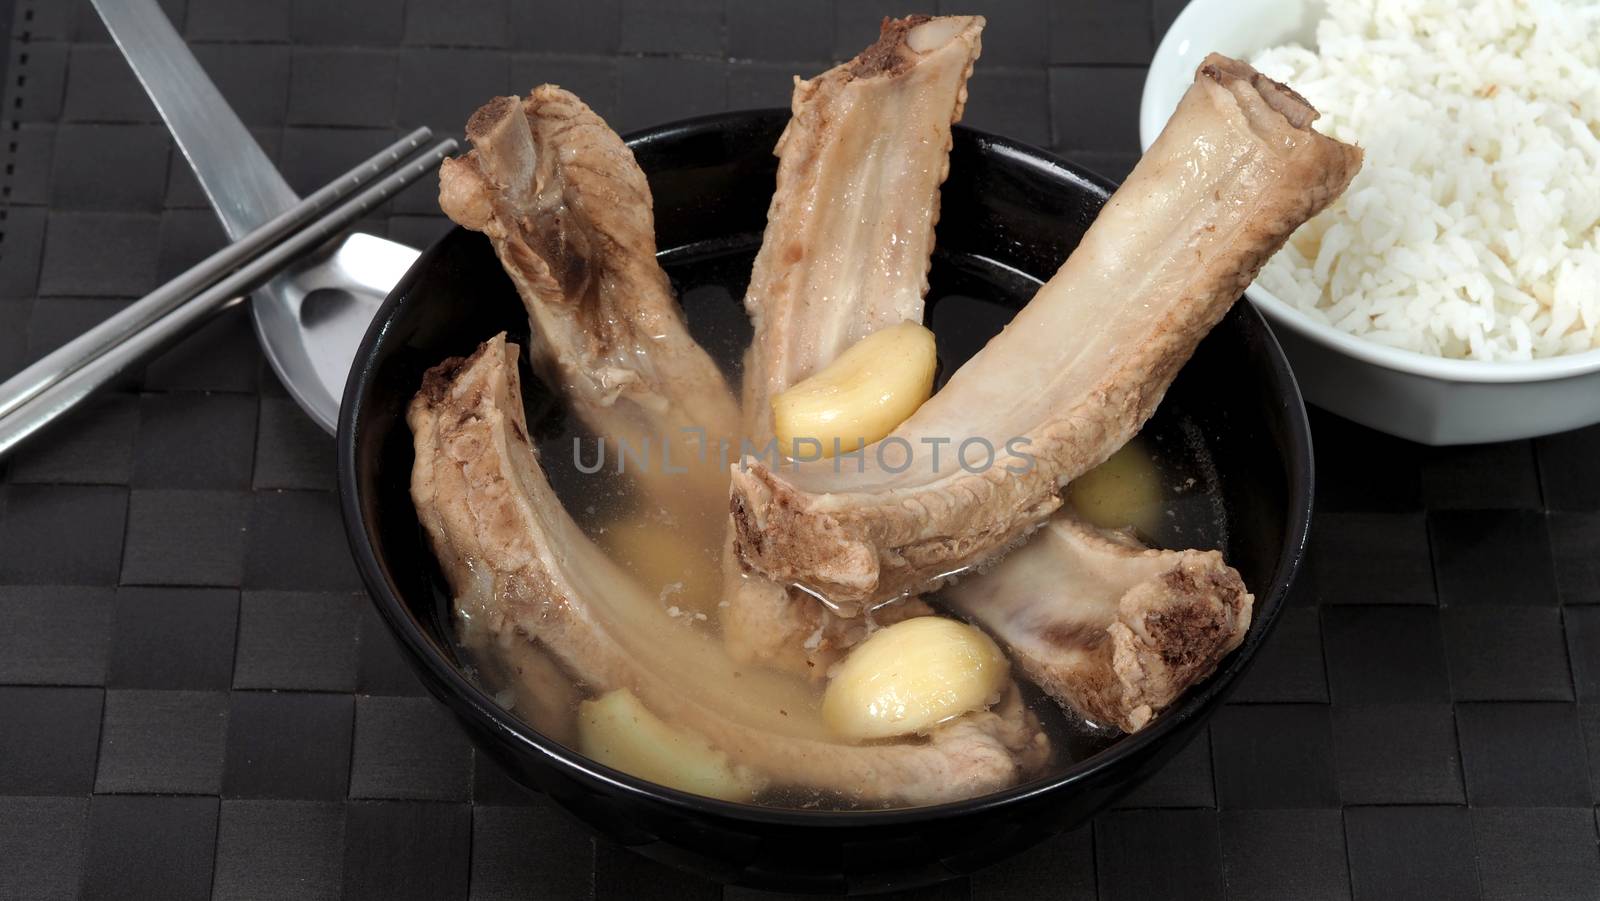 Bak kut teh or pork ribs soup which made from many ingredients such as big garlic, white pepper and many spices. Very popular traditional authentic menu dish in Singapore and Malaysia. Served hot with rice bowl